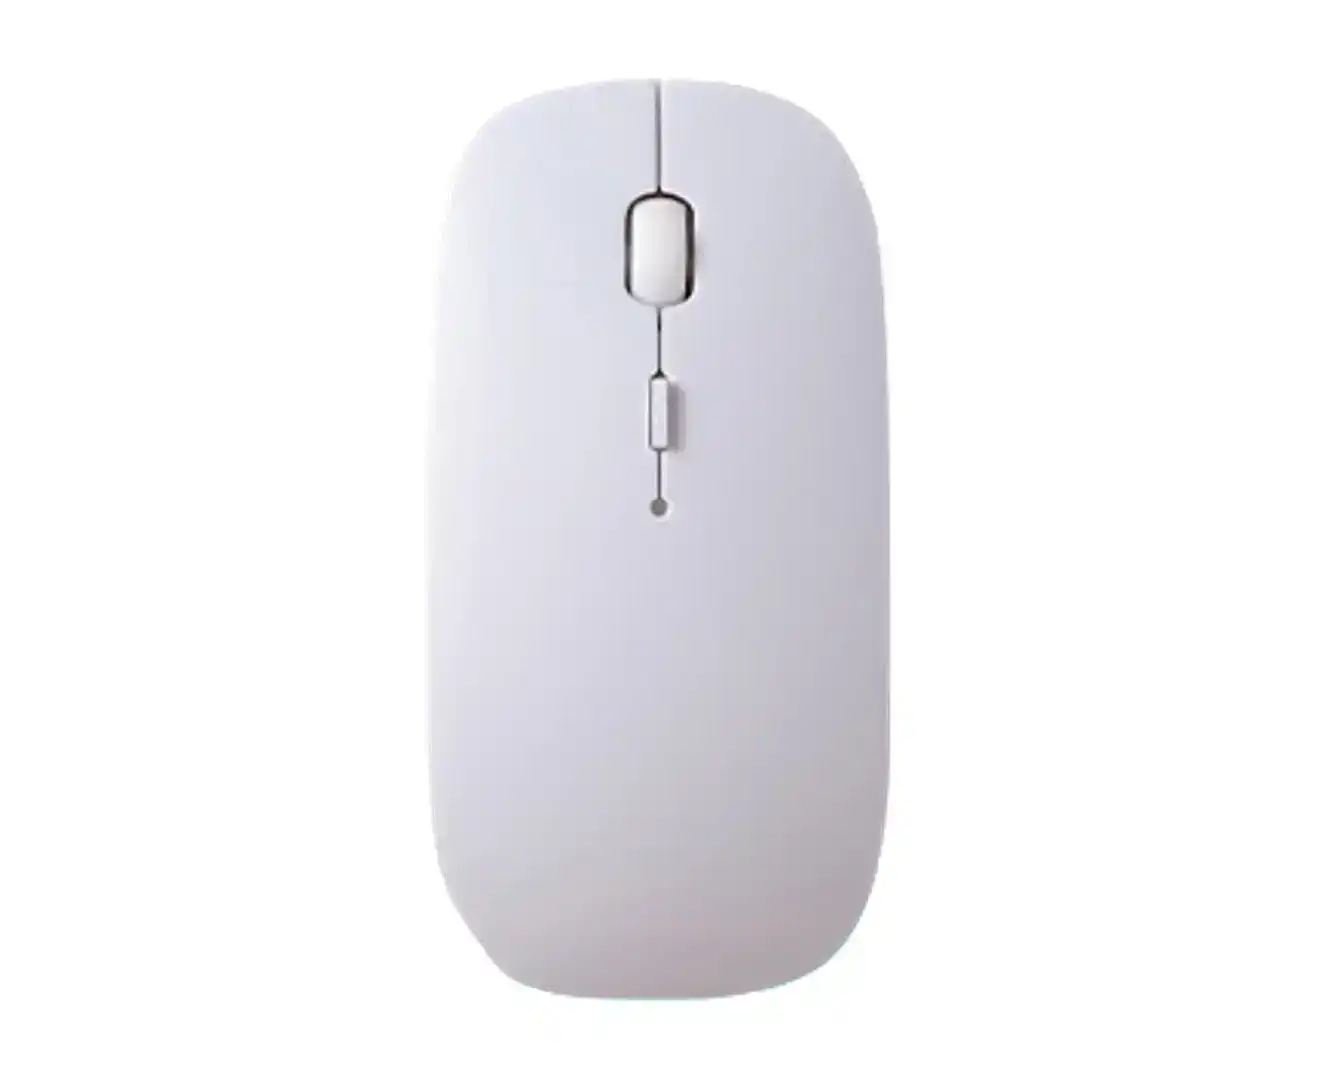 Dual Mode Bluetooth + 2.4GHz Wireless Mouse Standalone for Tablets, Smartphones, PCs, White